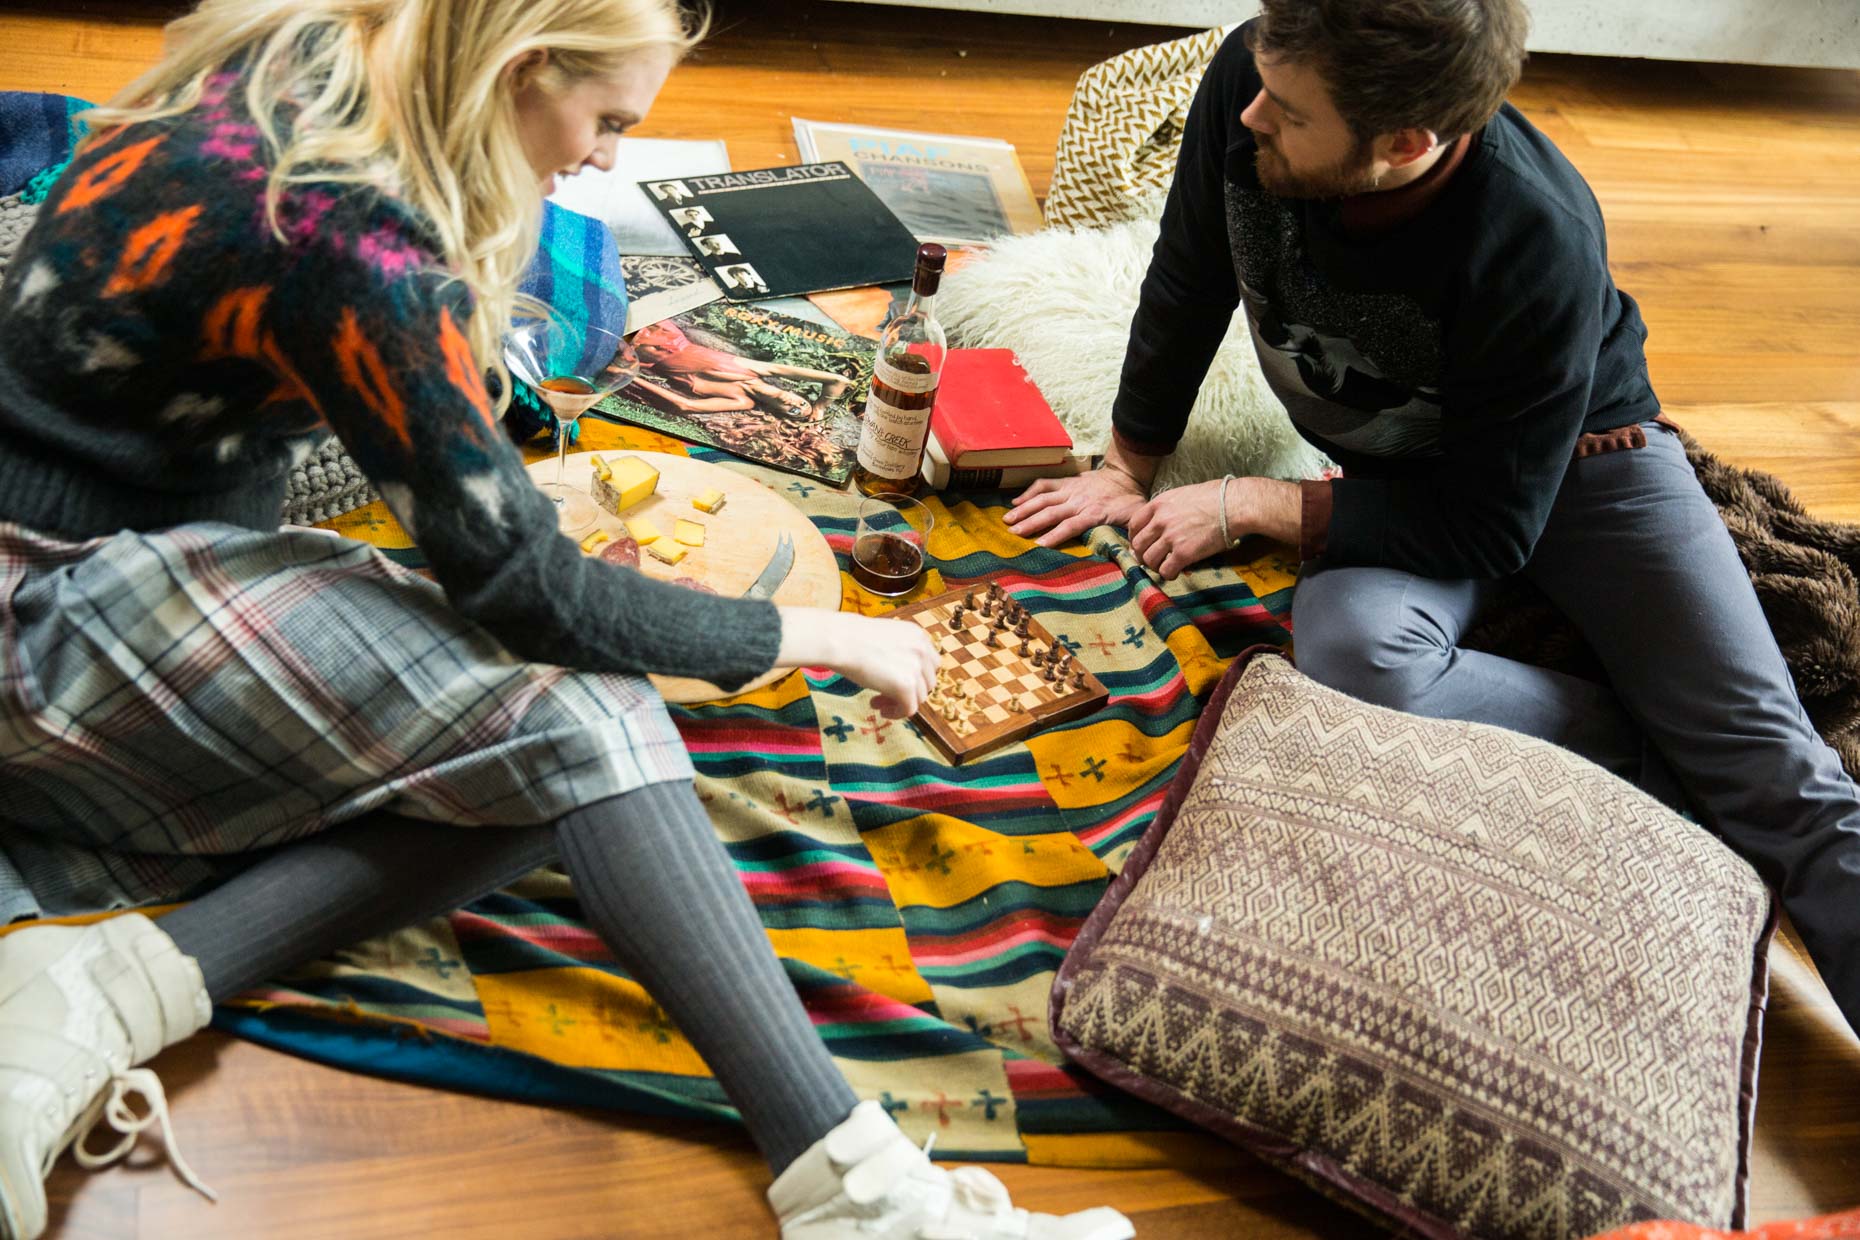 Man and women playing card game on colorful blanket